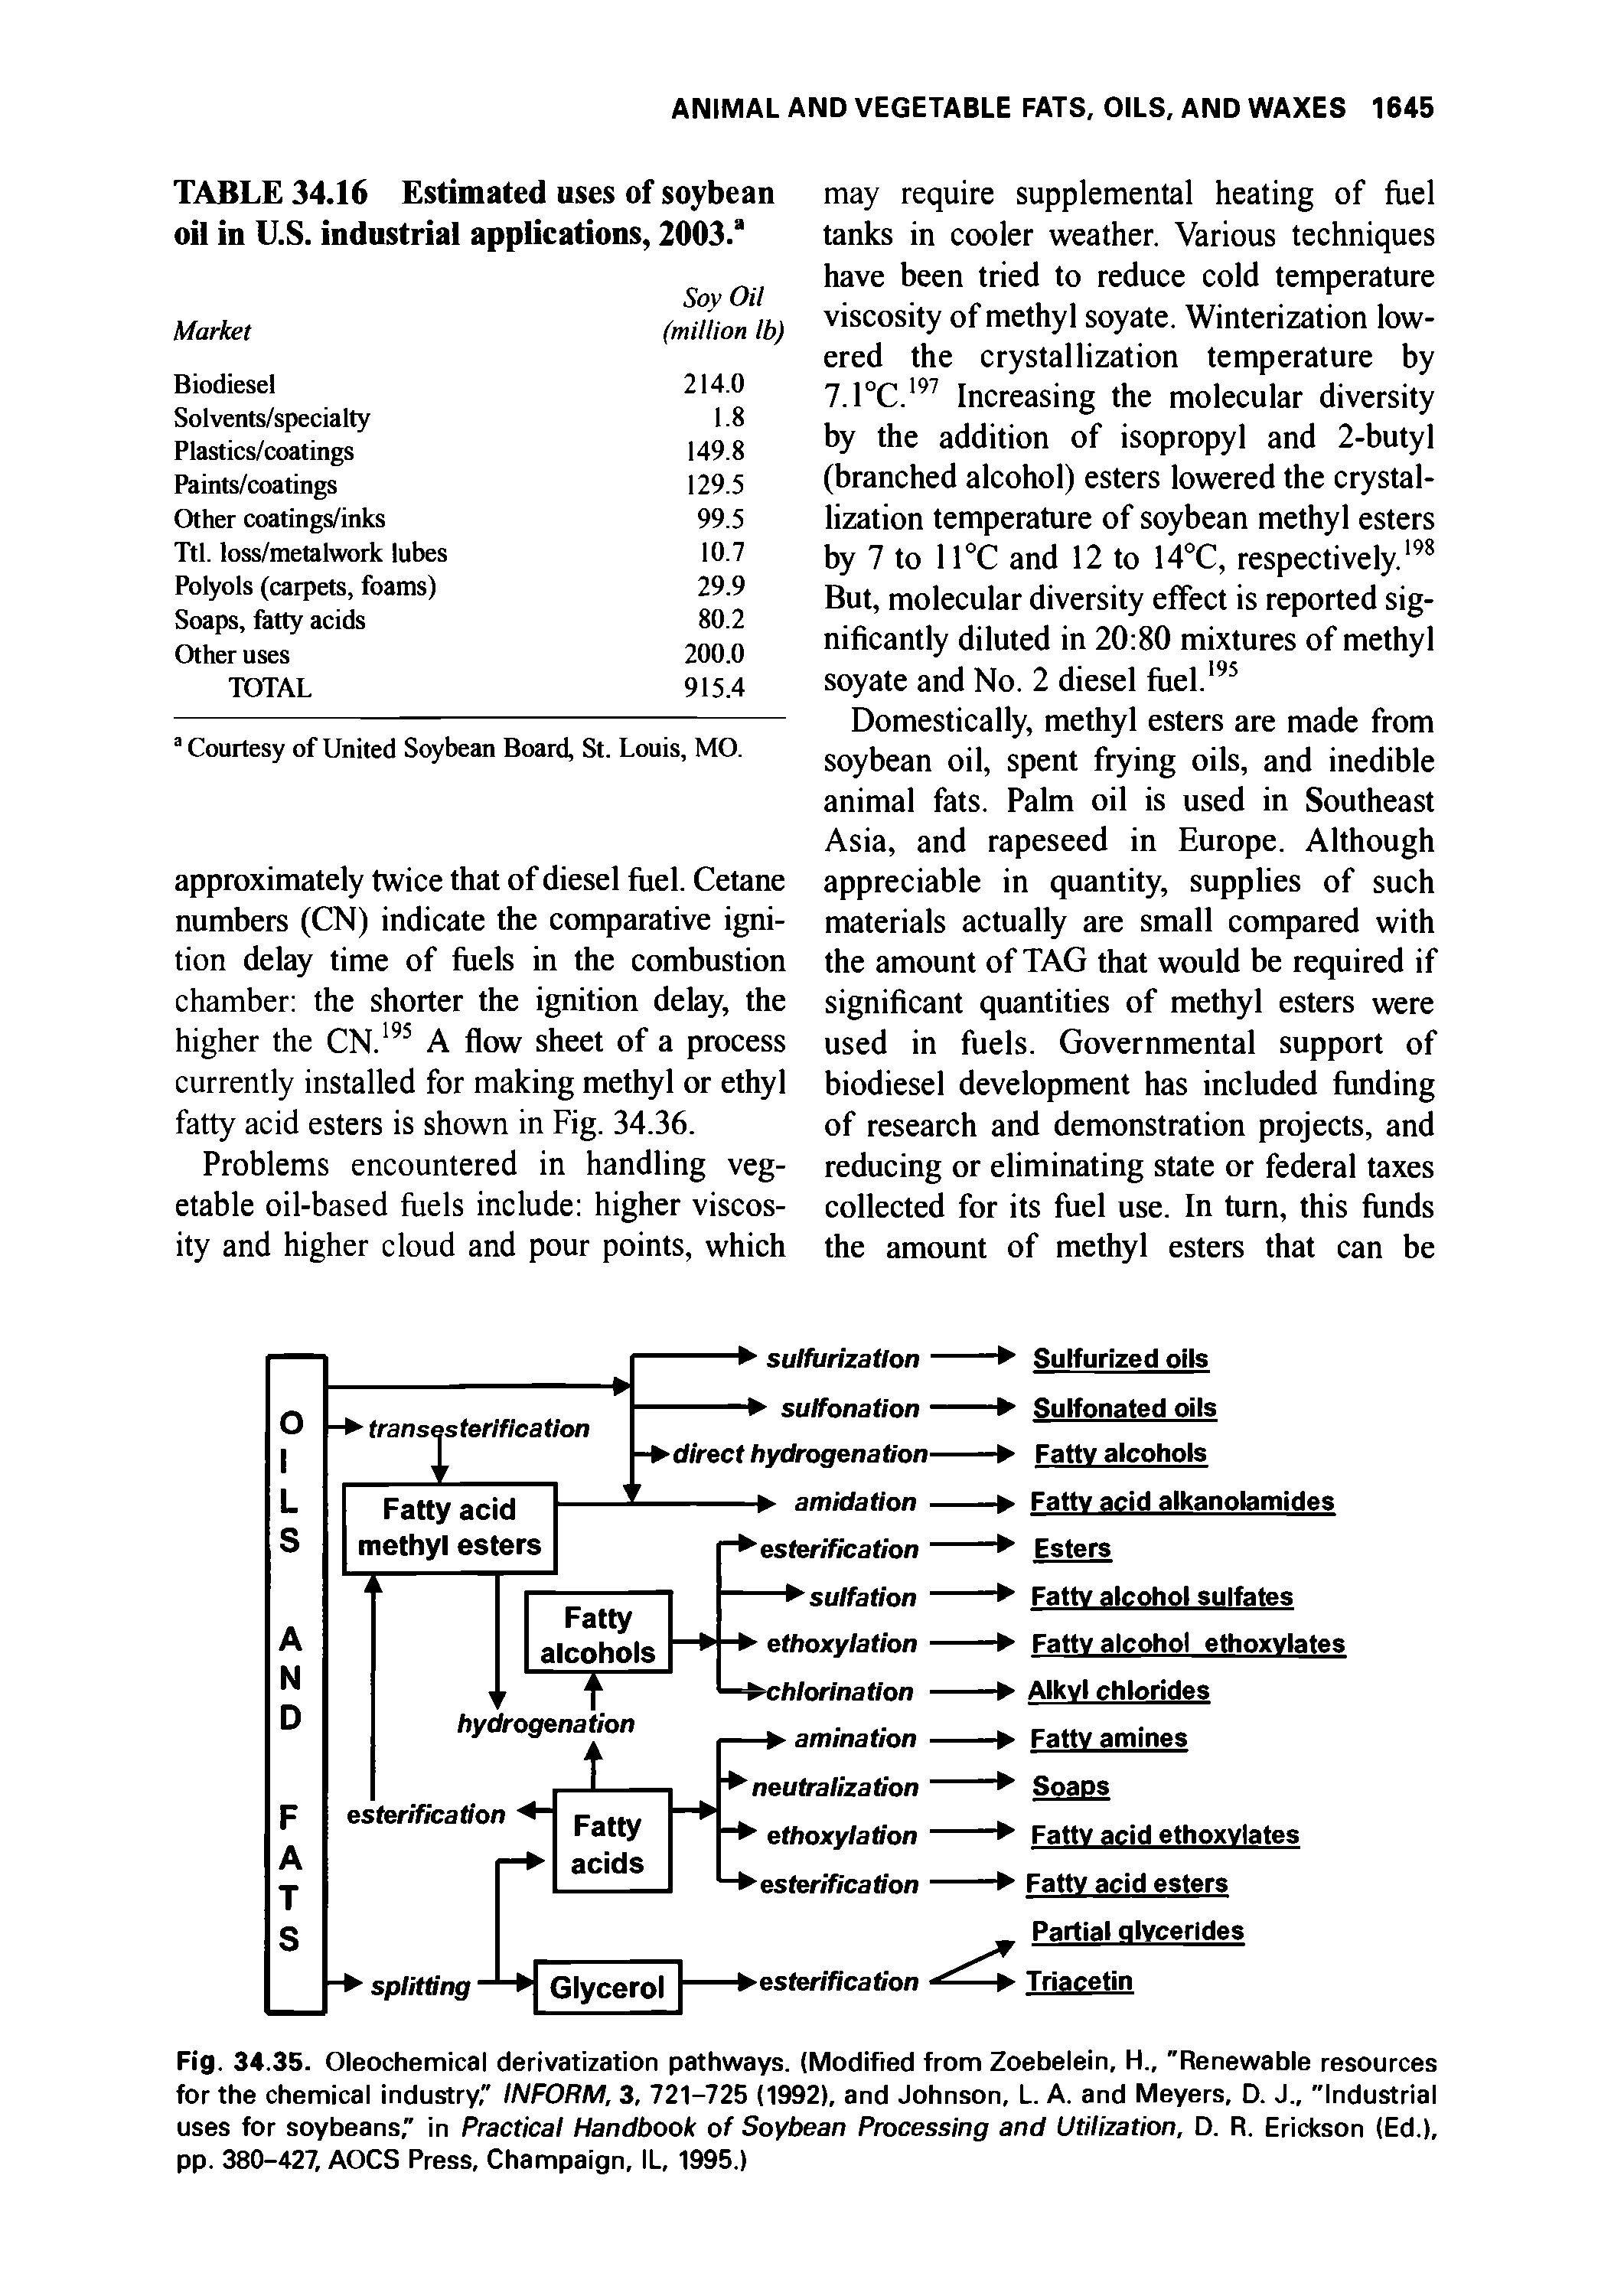 Fig. 34.35. Oleochemical derivatization pathways. (Modified from Zoebelein, H "Renewable resources for the chemical industry," INFORM, 3, 721-725 (1992), and Johnson, L. A. and Meyers, D. J "Industrial uses for soybeans," in Practical Handbook of Soybean Processing and Utilization, D. R. Erickson (Ed.), pp. 380-427, AOCS Press, Champaign, IL, 1995.)...